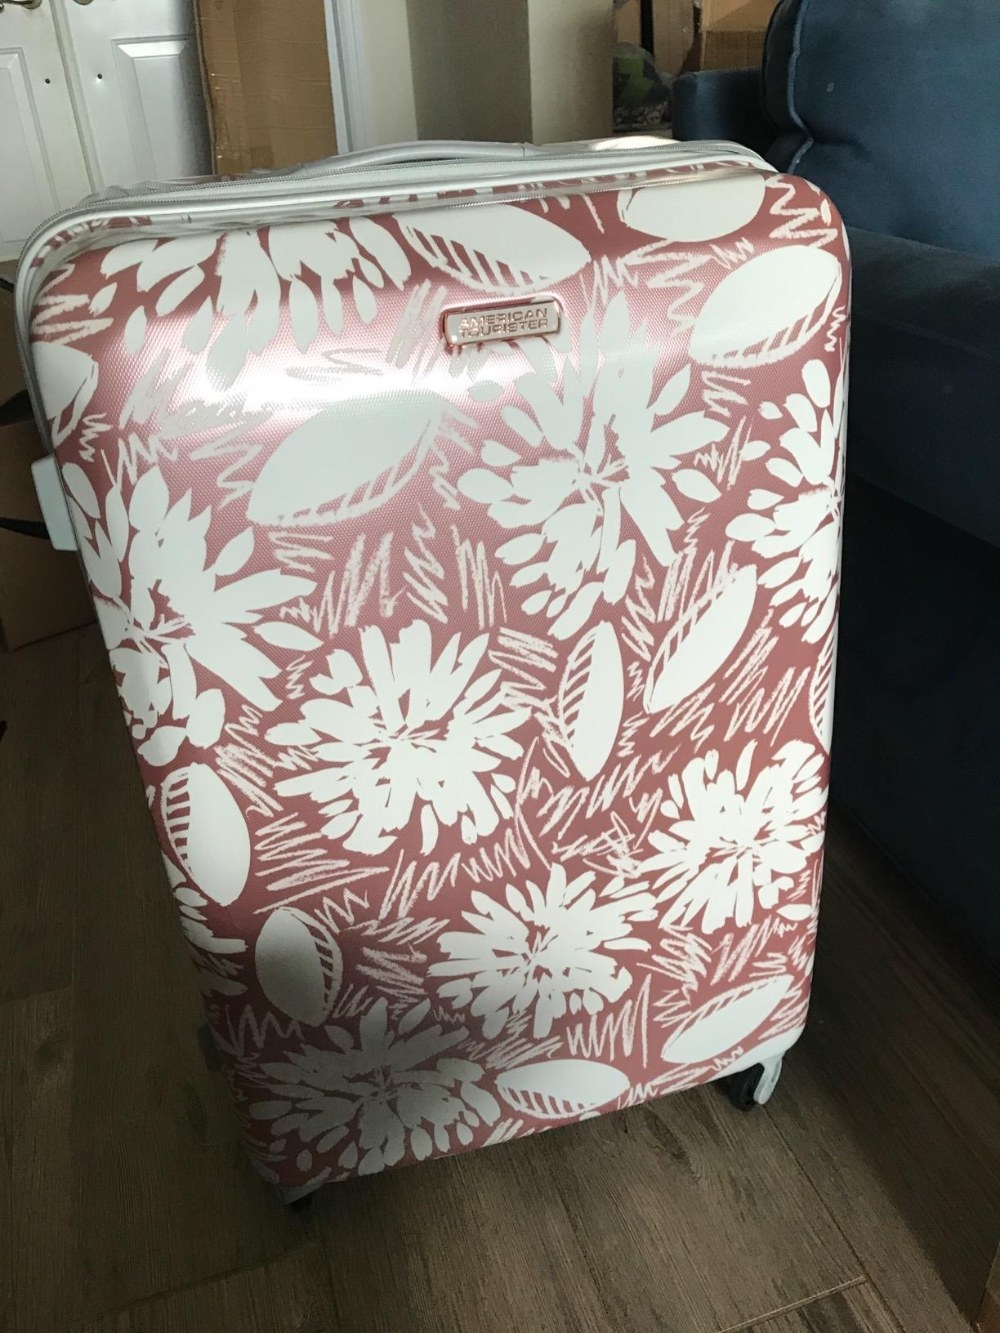 The suitcase in the color Ascending Gardens Rose Gold